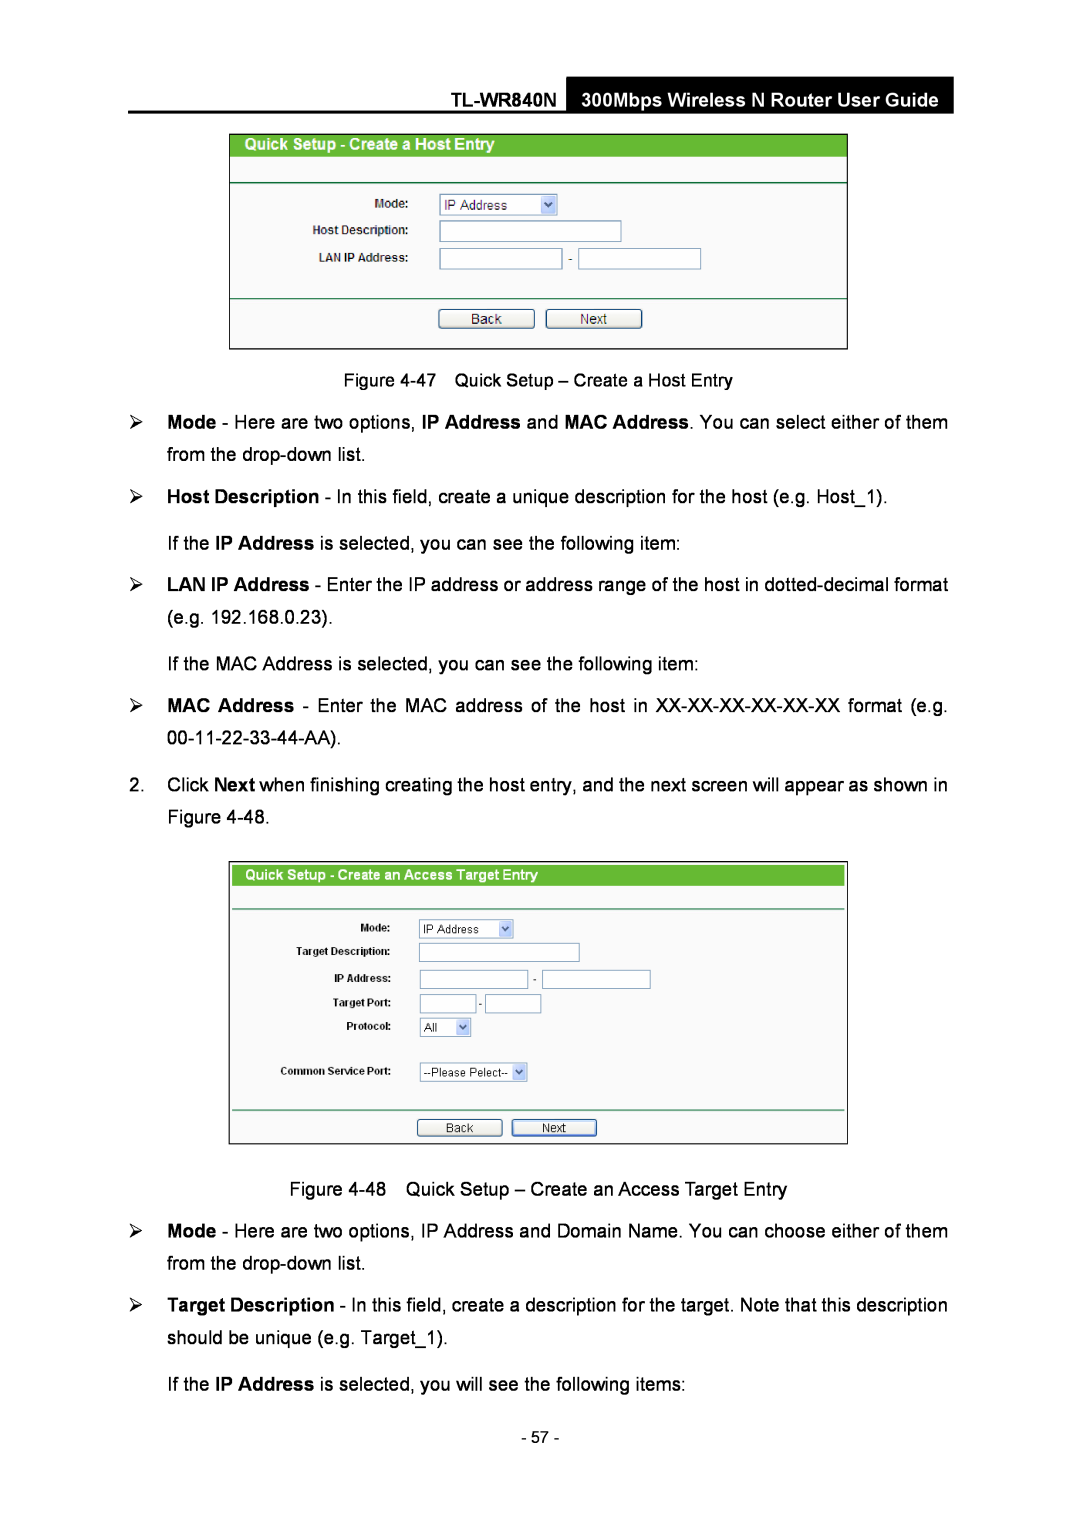 TP-Link TL-WR840N 300Mbps Wireless N Router User Guide, If the MAC Address is selected, you can see the following item 